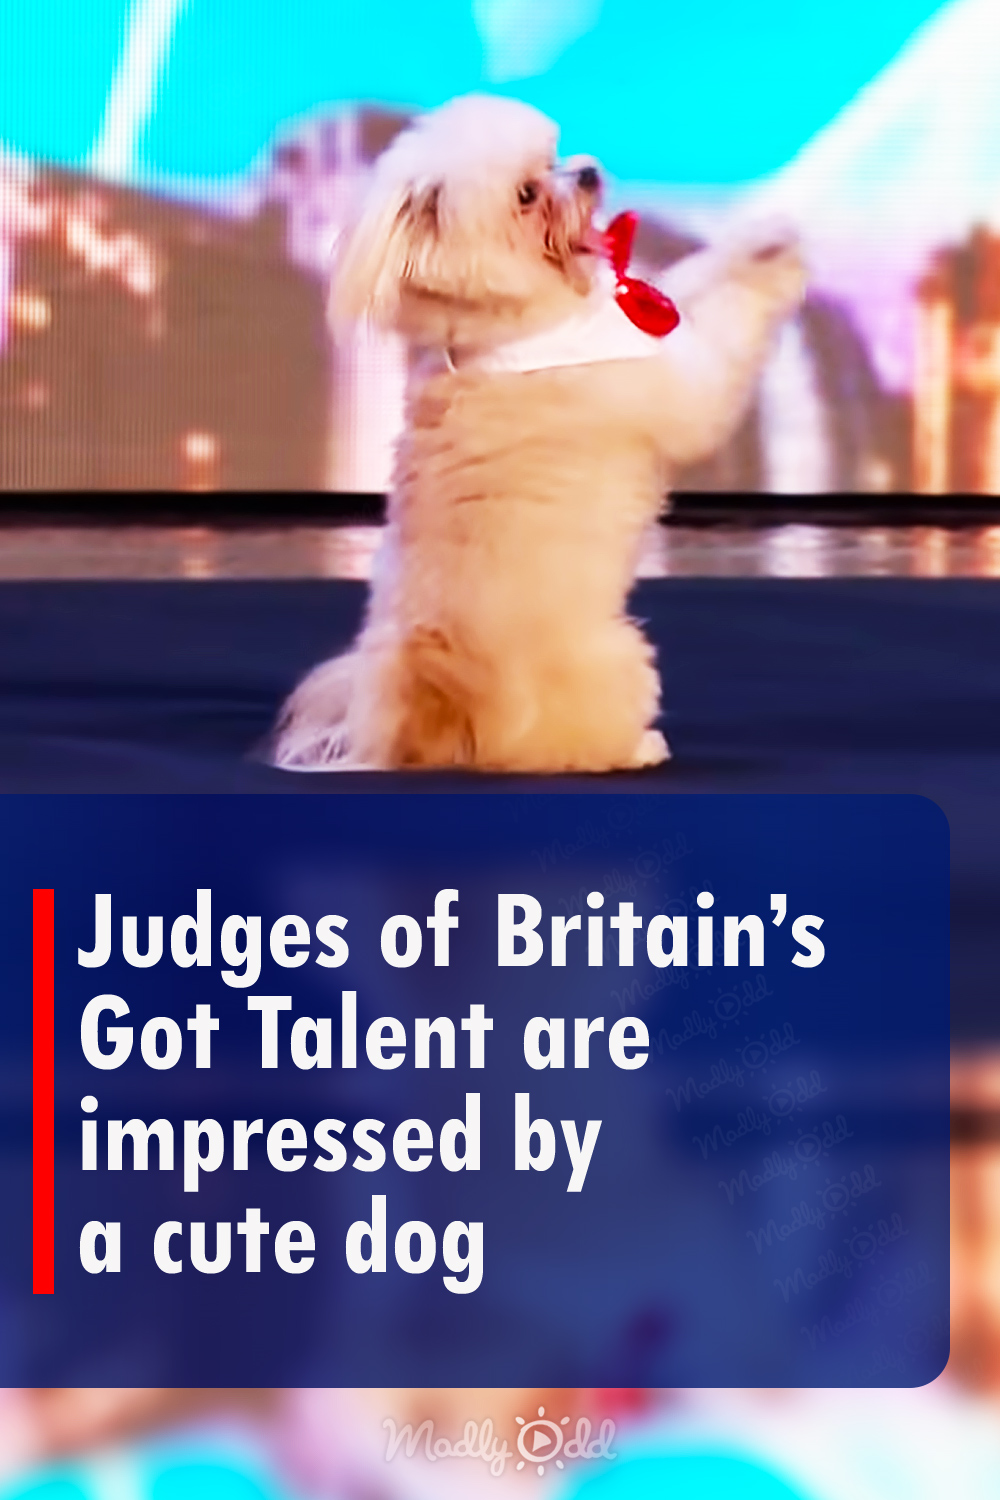 Judges of Britain’s Got Talent are impressed by a cute dog